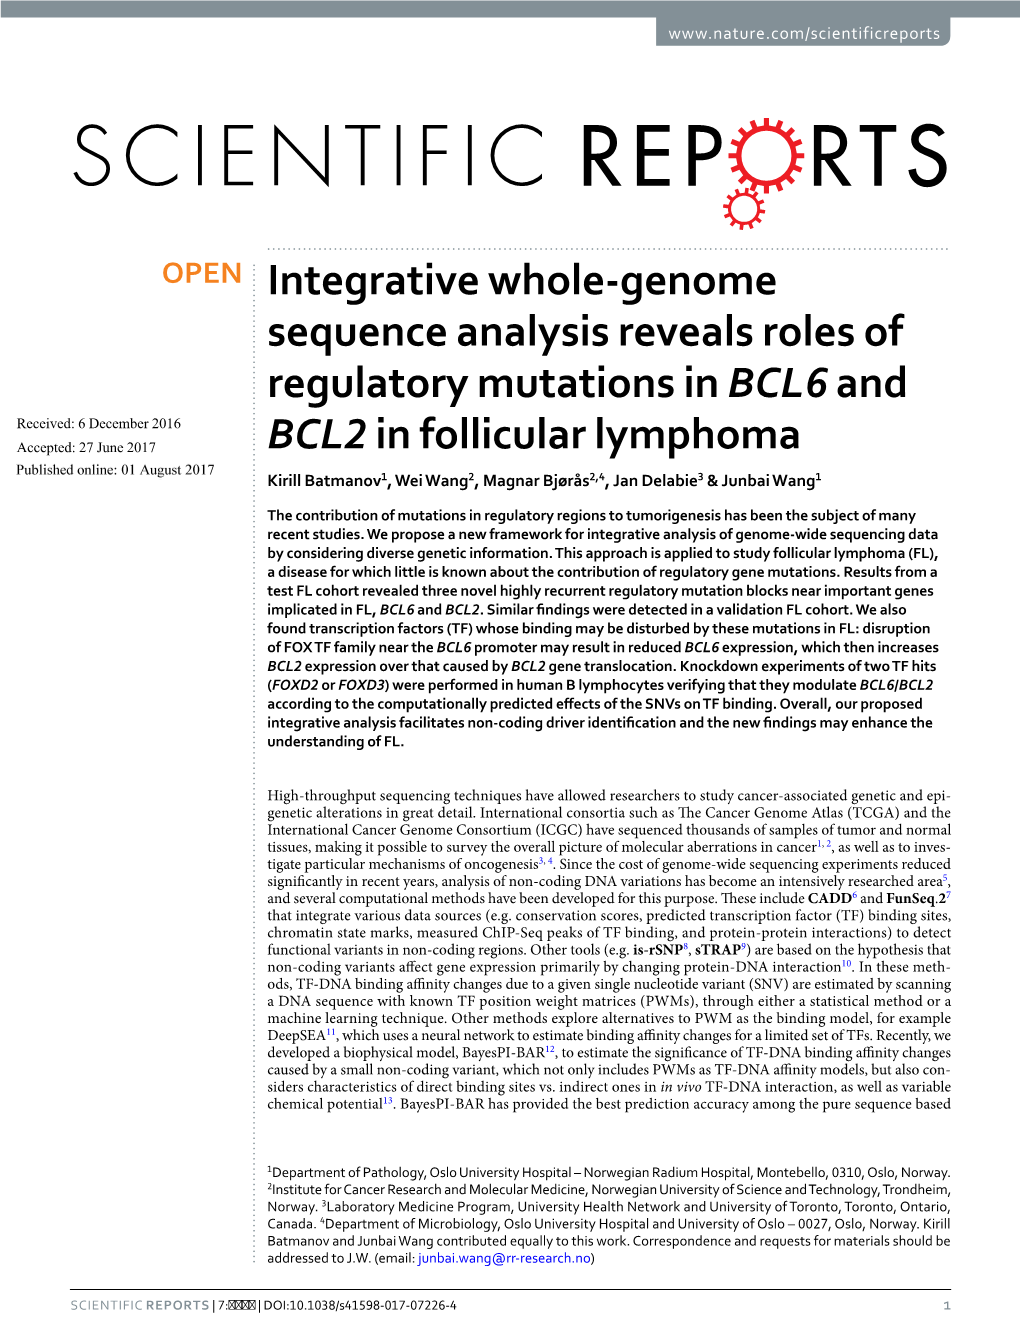 Integrative Whole-Genome Sequence Analysis Reveals Roles of Regulatory